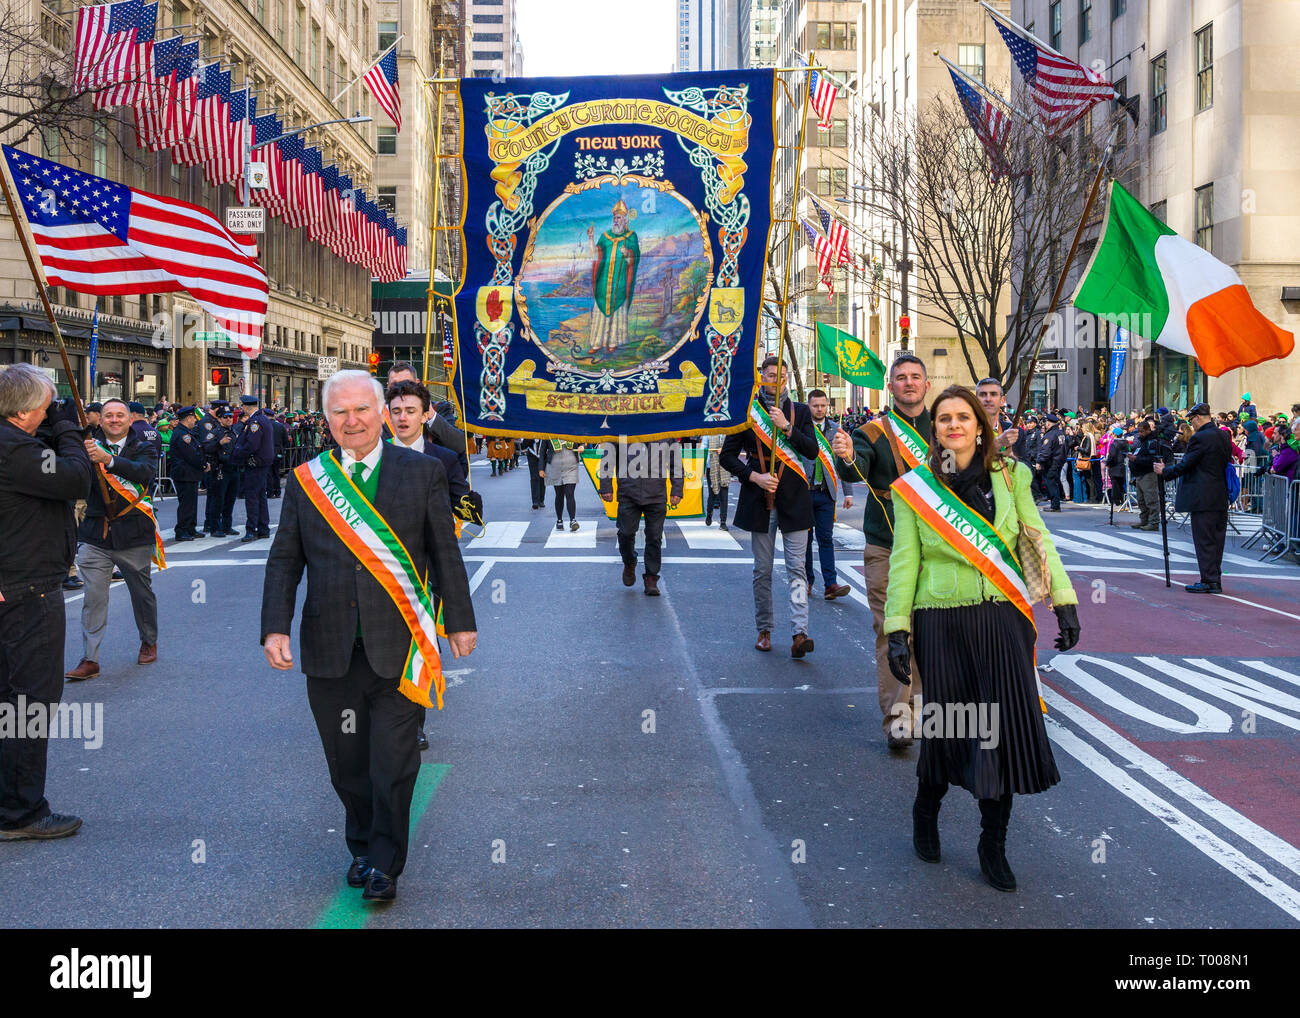 New York, USA. 16 March 2019.  Members of the County Tyrone Society march through New York's 5th Avenue during the 258th NYC St. Patrick's Day Parade.  Photo by Enrique Shore Credit: Enrique Shore/Alamy Live News Stock Photo